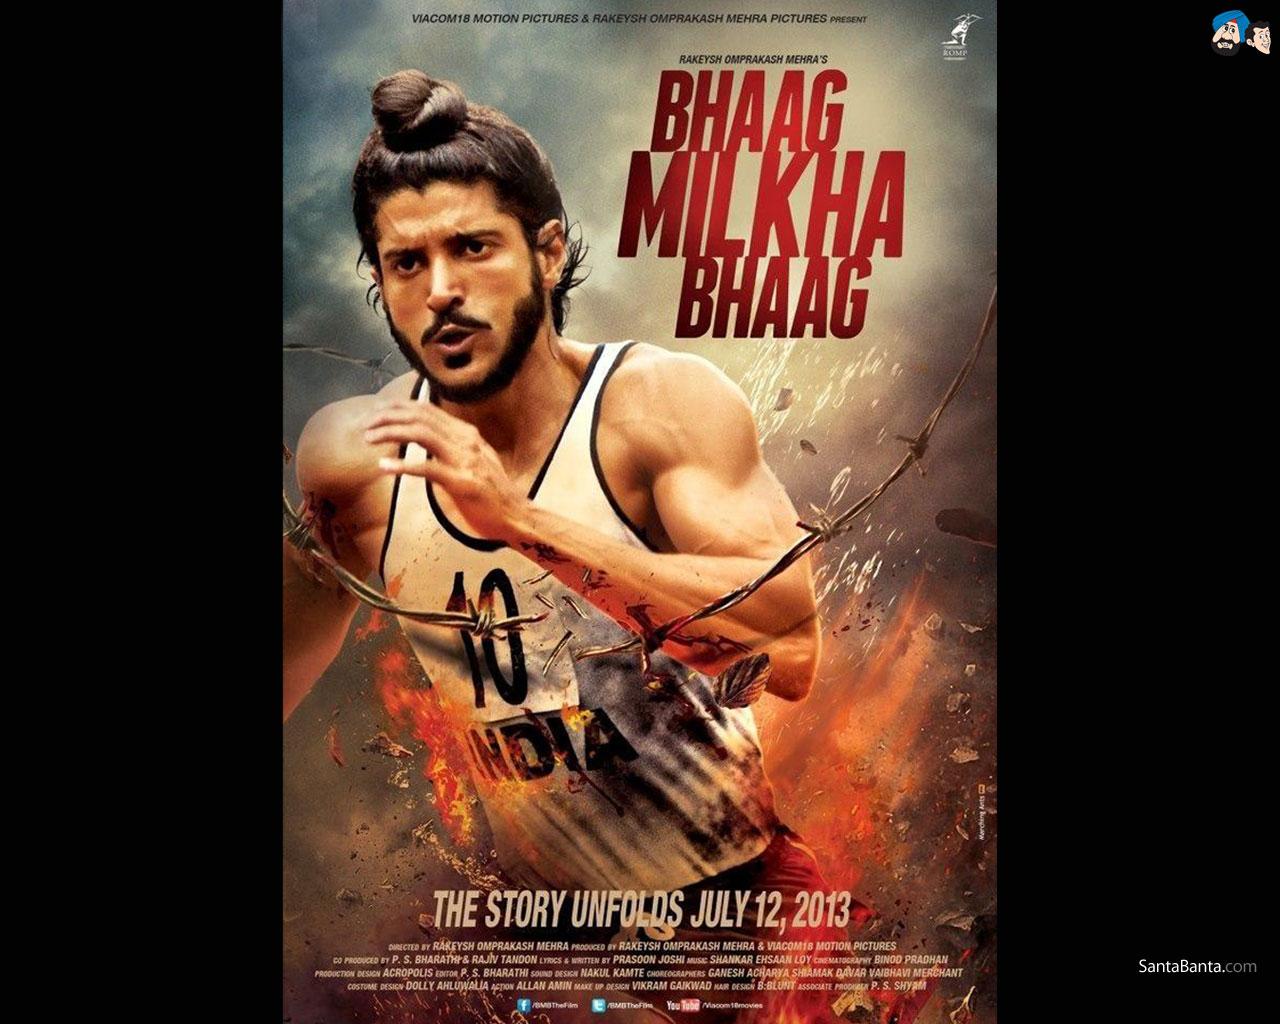 Bhaag Milkha Bhaag: The film was based on the life of legendary Indian athlete Milkha Singh. Actor-turned-director Farhan Akhtar essayed the role of Milkha Singh. Farhan trained for a perfect physique and looked strikingly similar to the Olympic medalist.